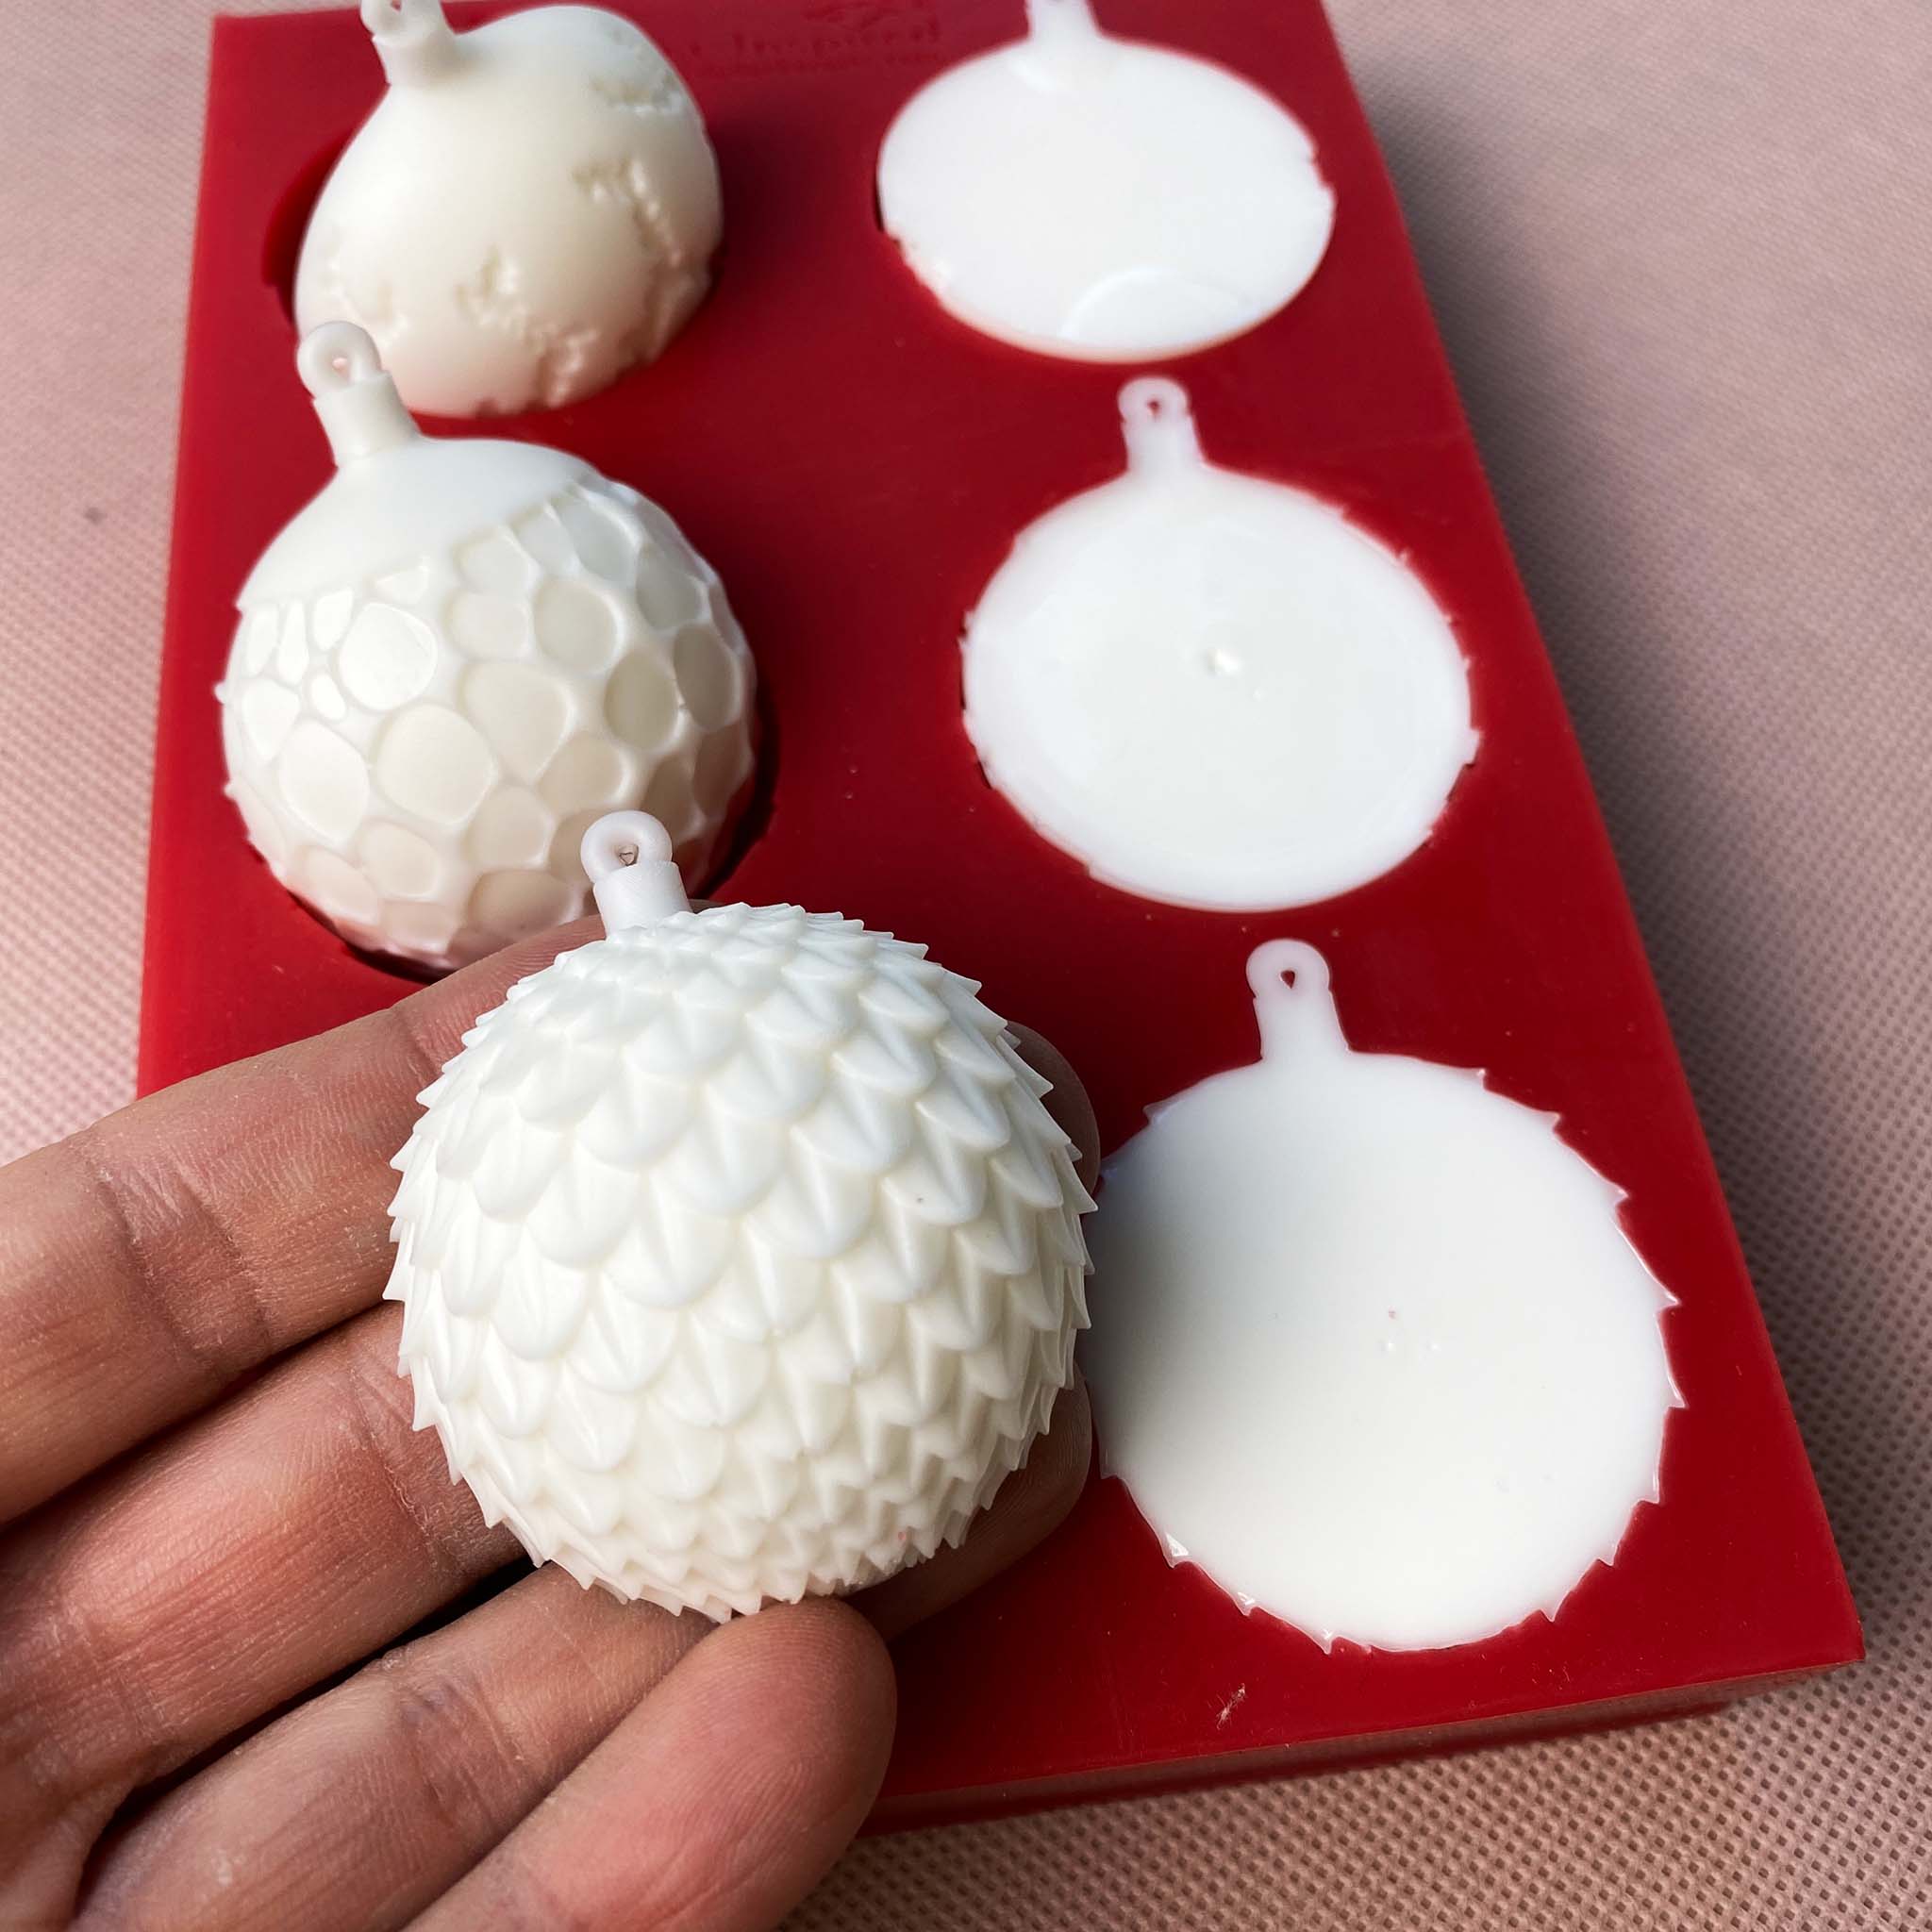 A red silicone mould of Get Inspired by Dadarkar Art's Christmas Ornaments is against a light colored material background. White resin castings sit in 3 of the moulds; 2 are flipped up to show the design; and a hand is holding one of the castings on 3 fingertips..